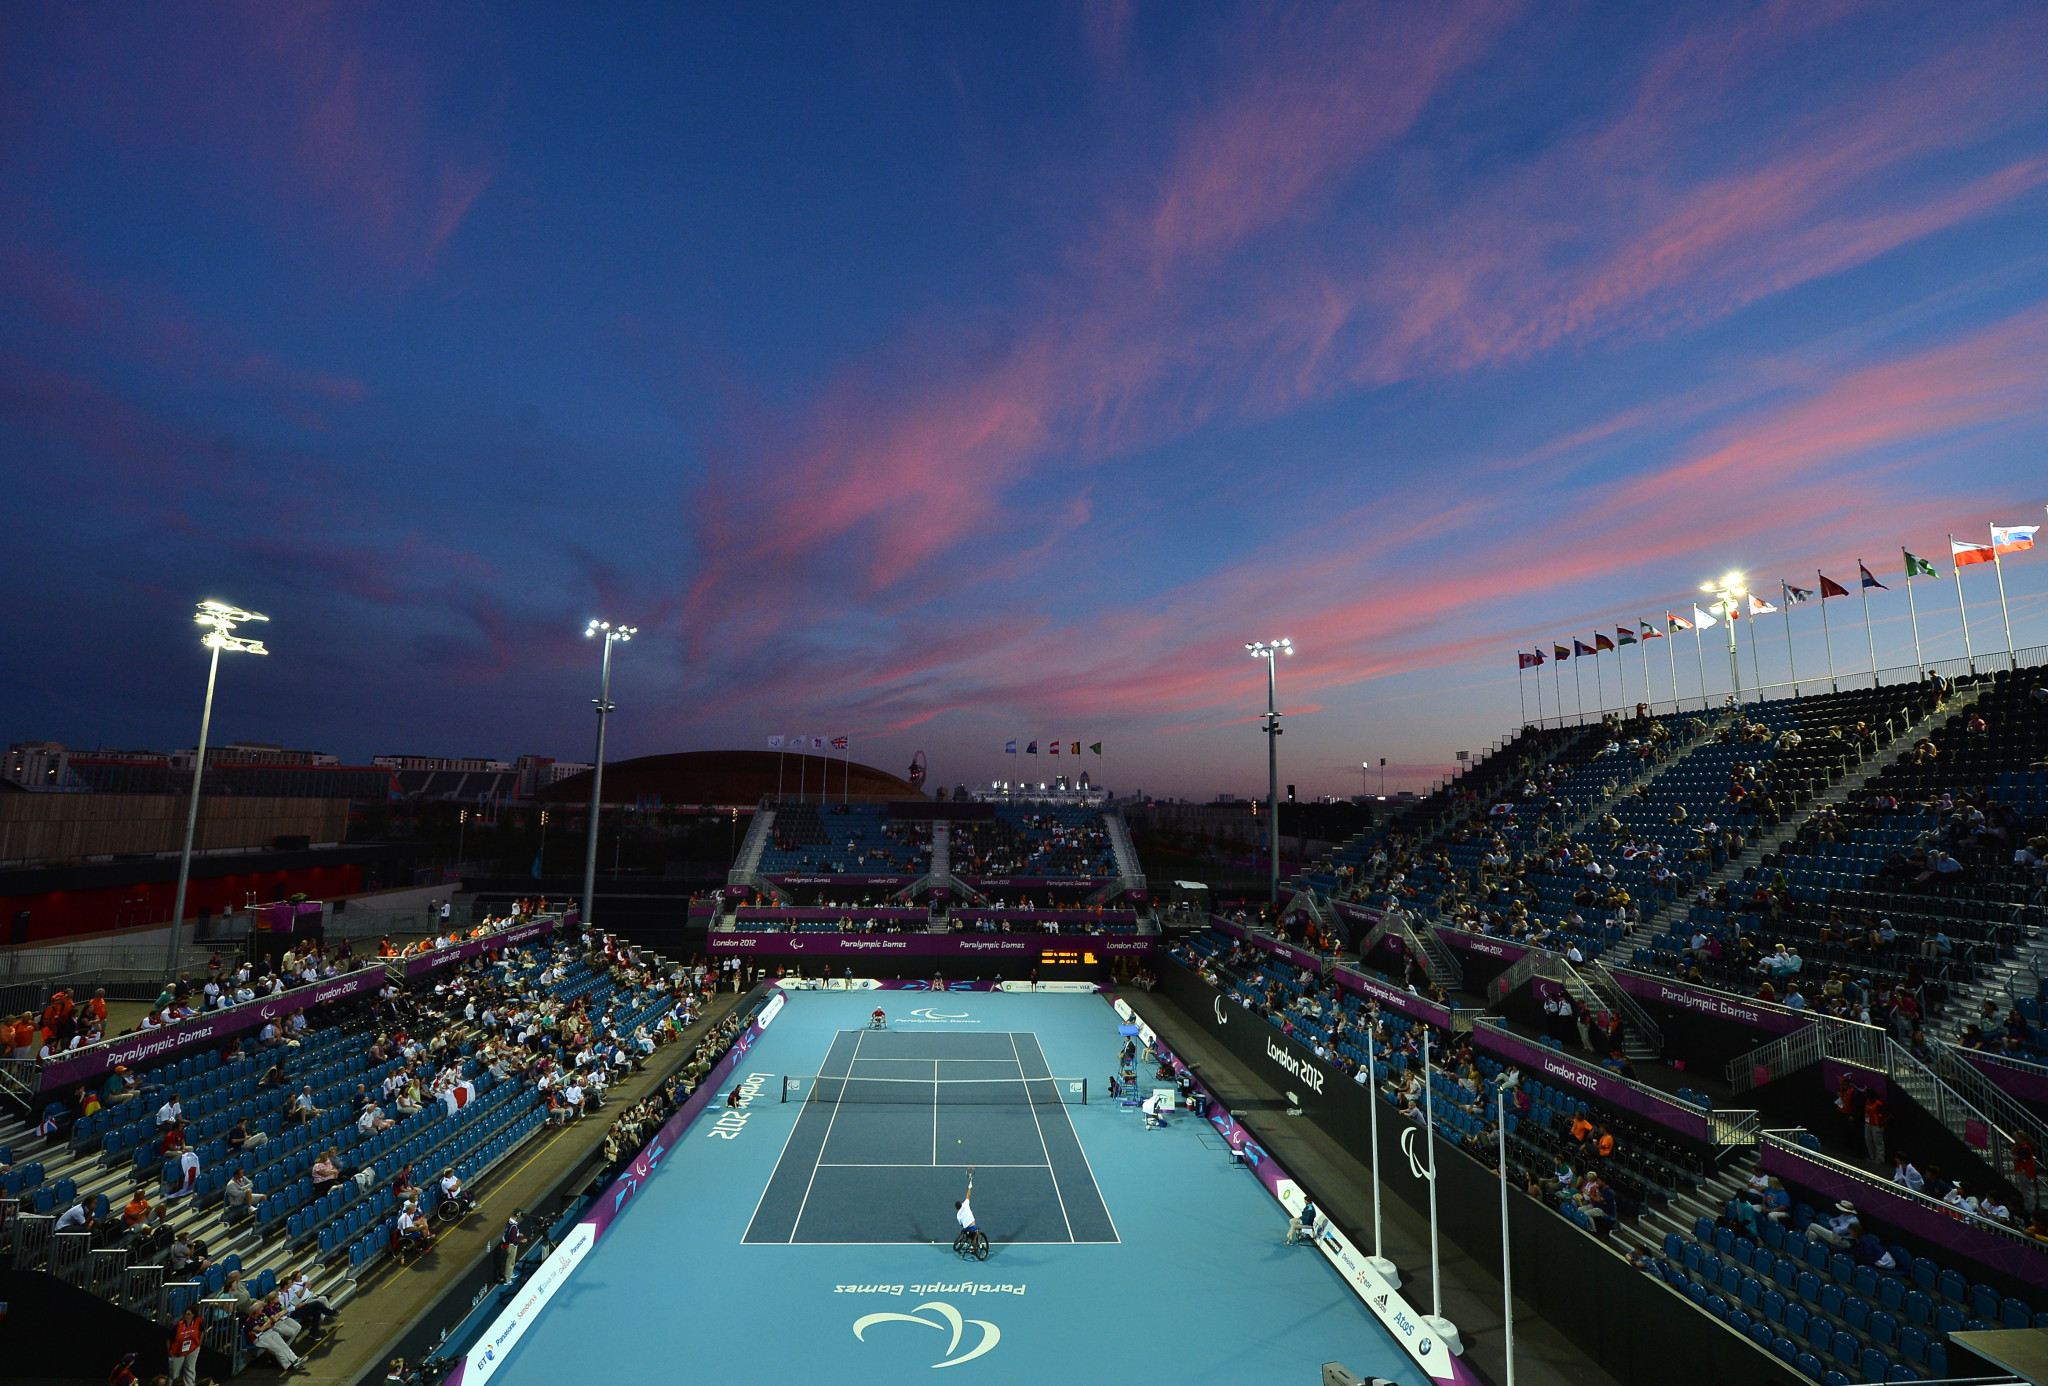 Maria Antonieta Ortiz competed in tennis at the London 2012 Paralympics ©Getty Images